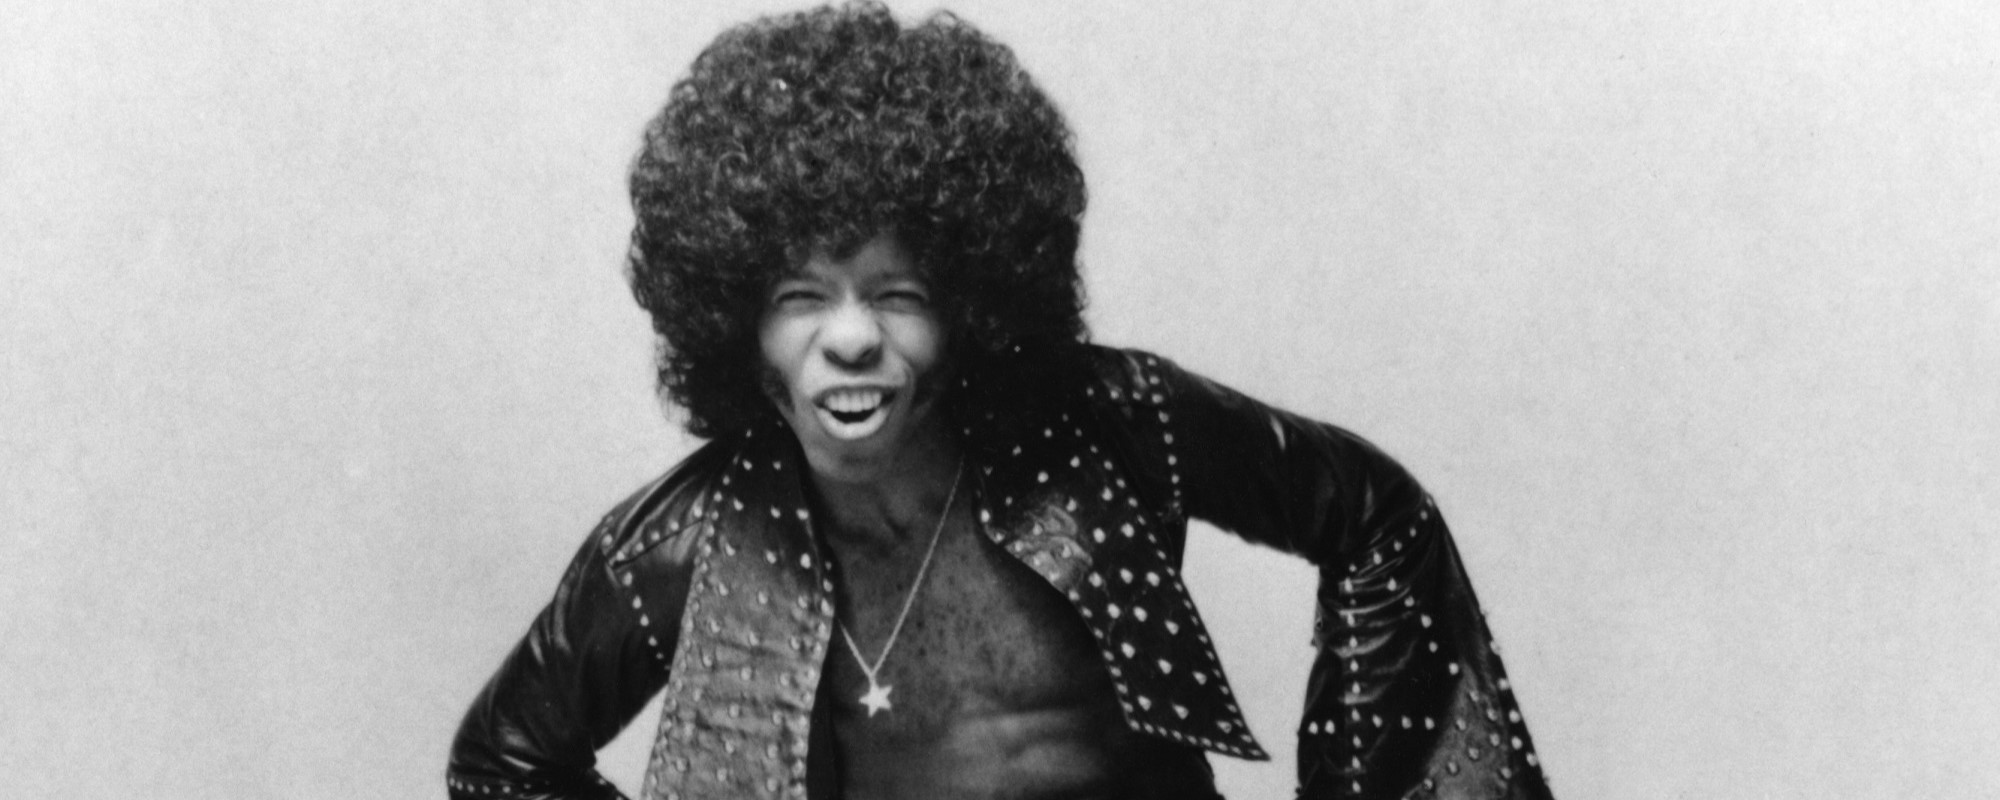 5 Fascinating Facts About Sly Stone in Honor of the Funk/Soul/Rock Legend